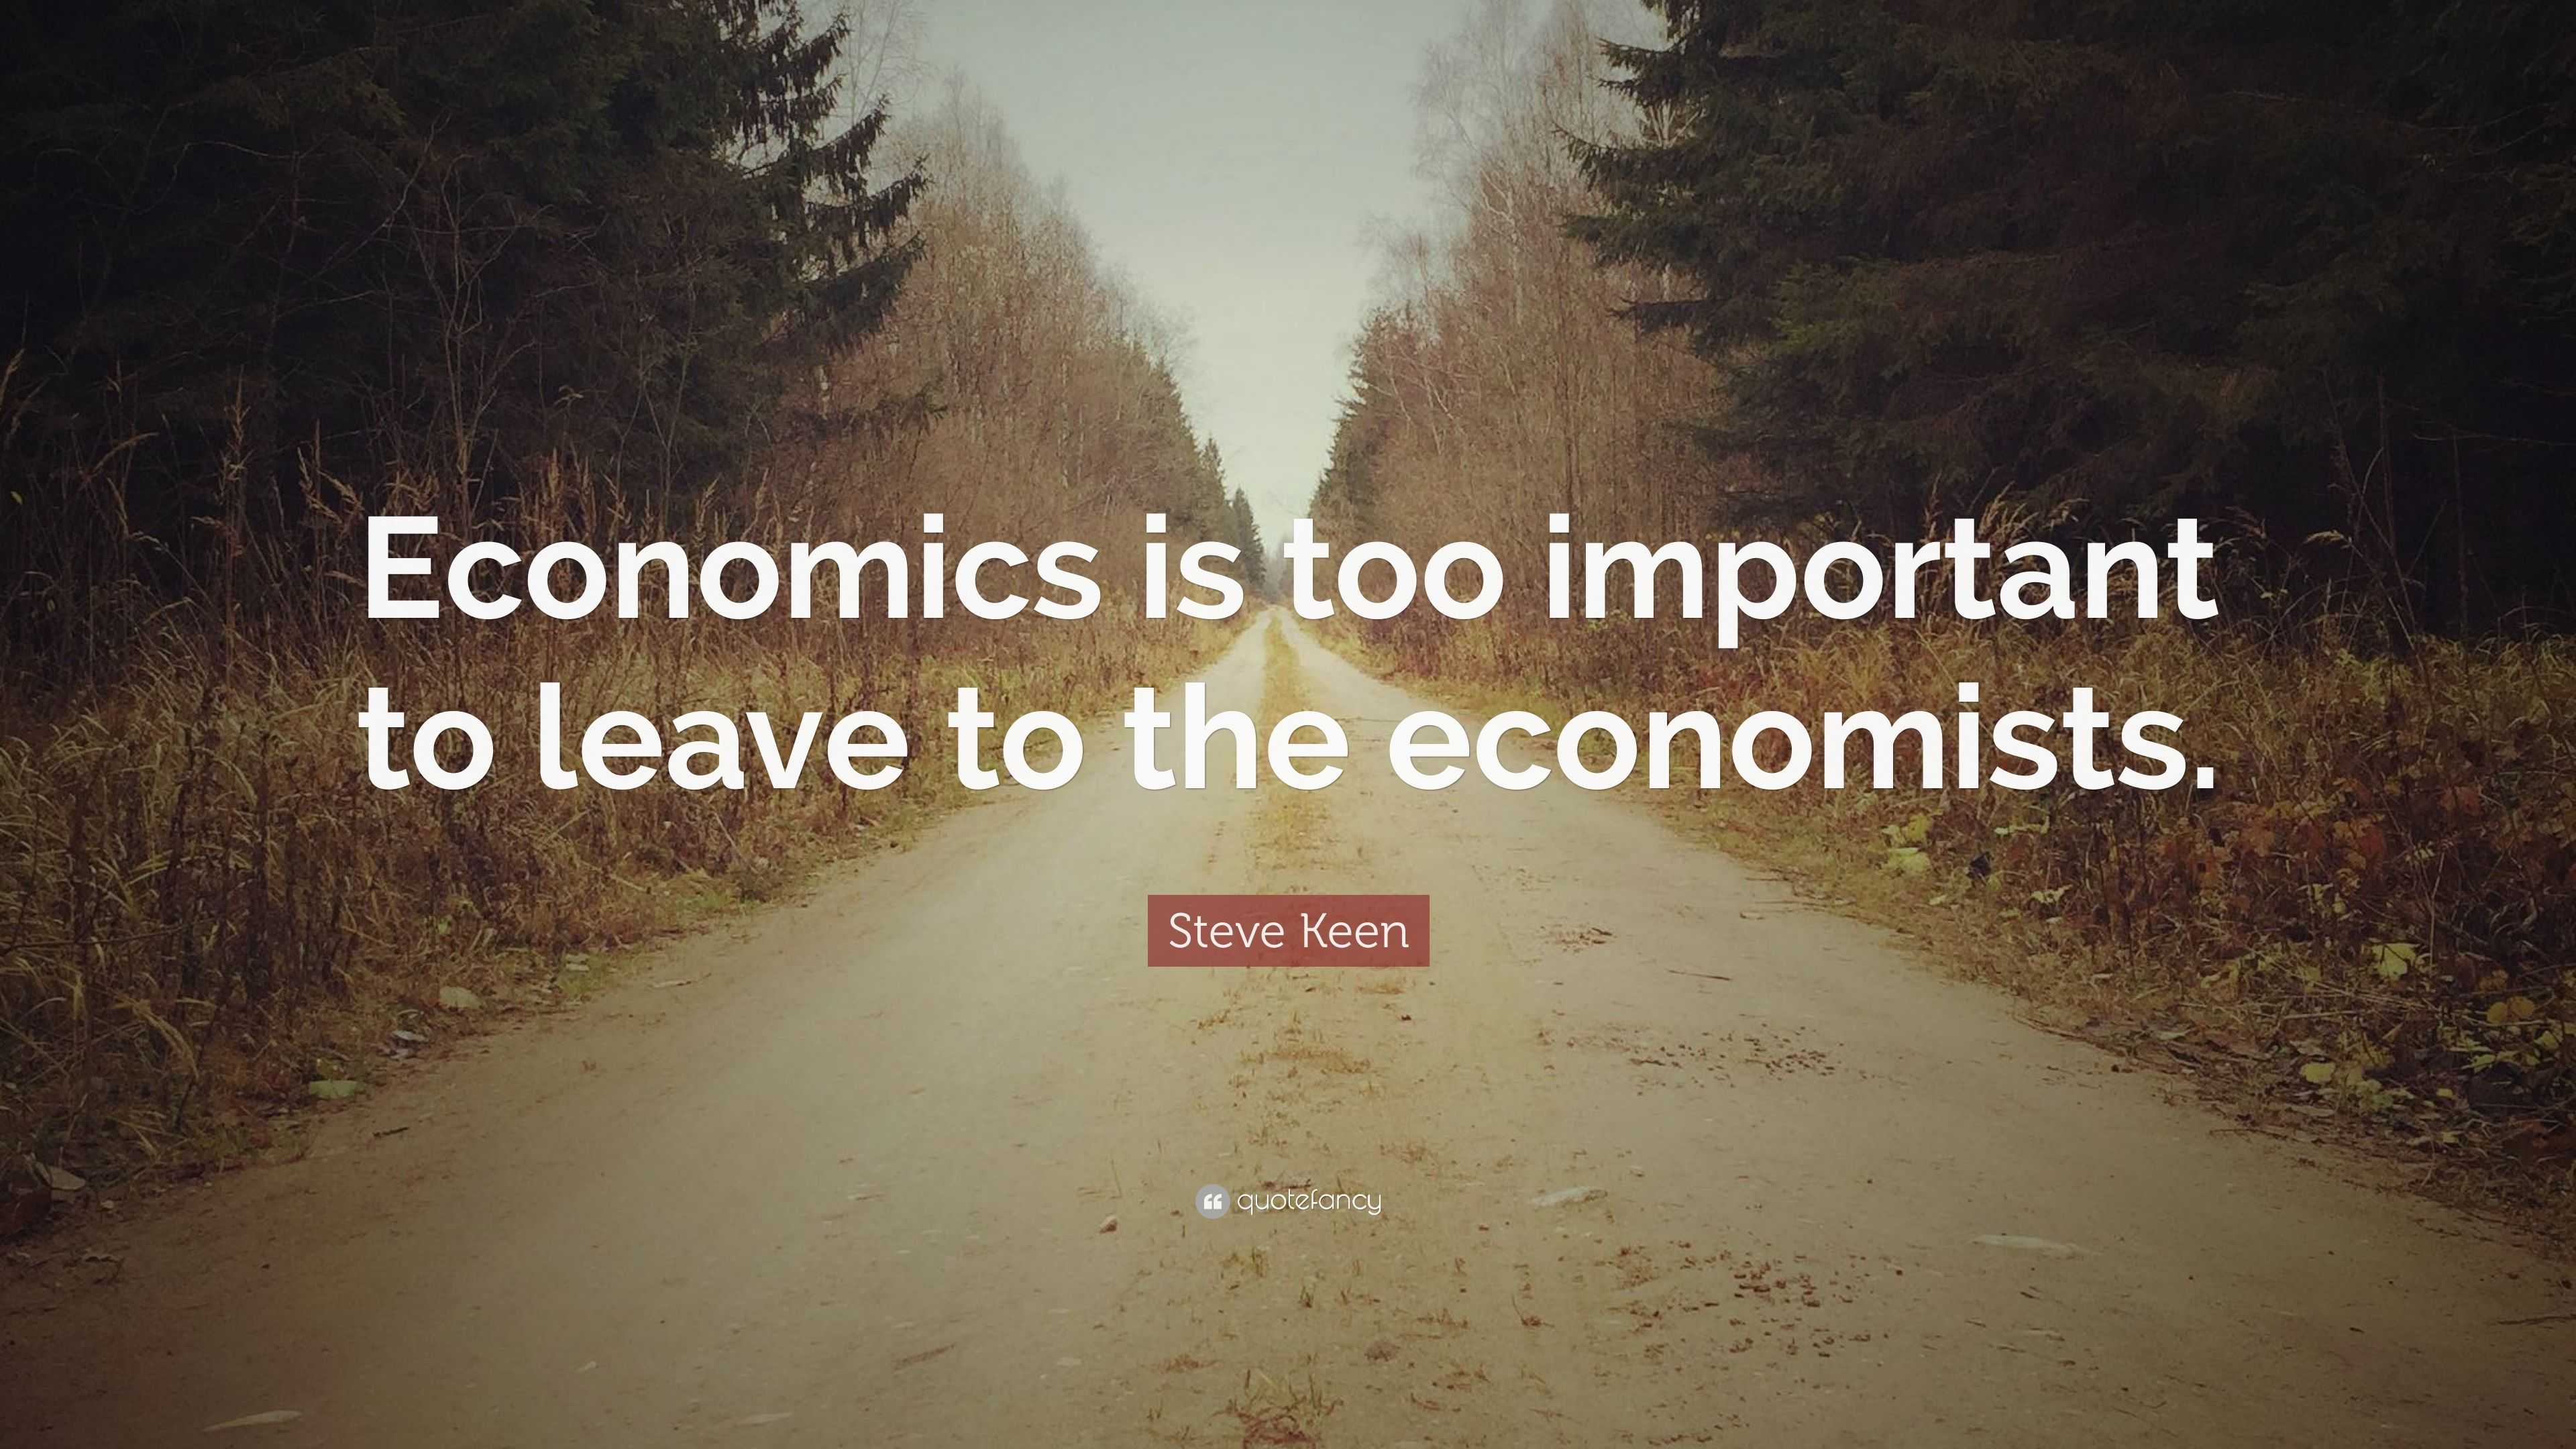 Steve Keen Quote “Economics is too important to leave to the economists.”